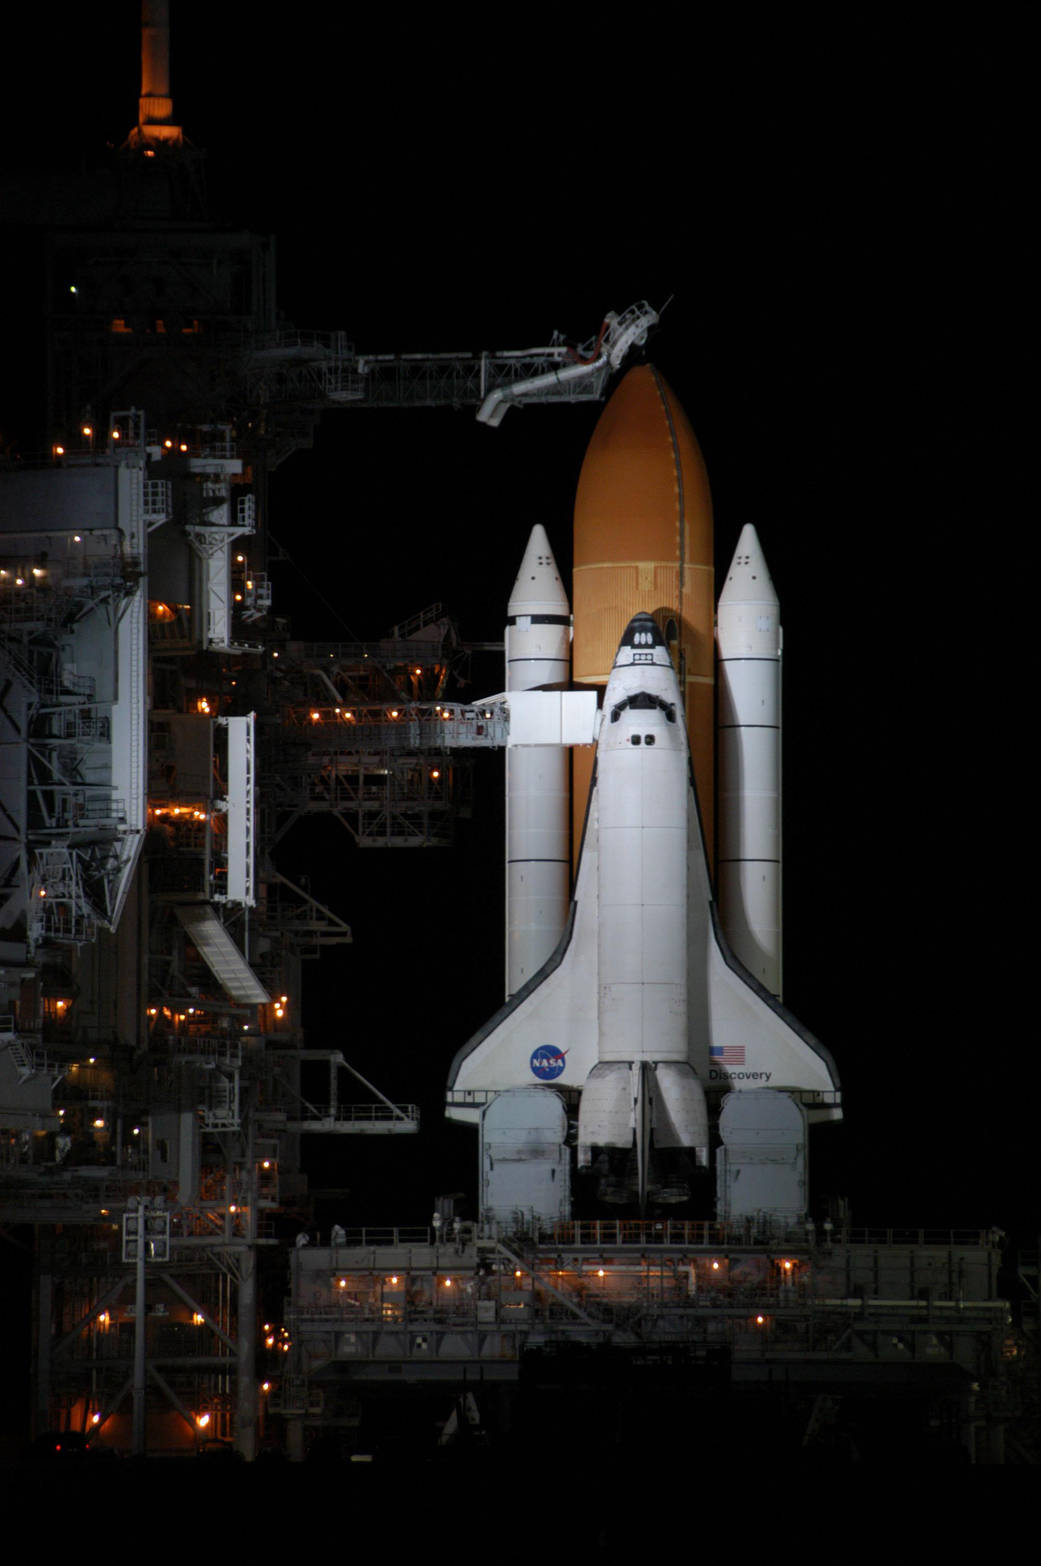 Shuttle Discovery vertical on launch pad at night